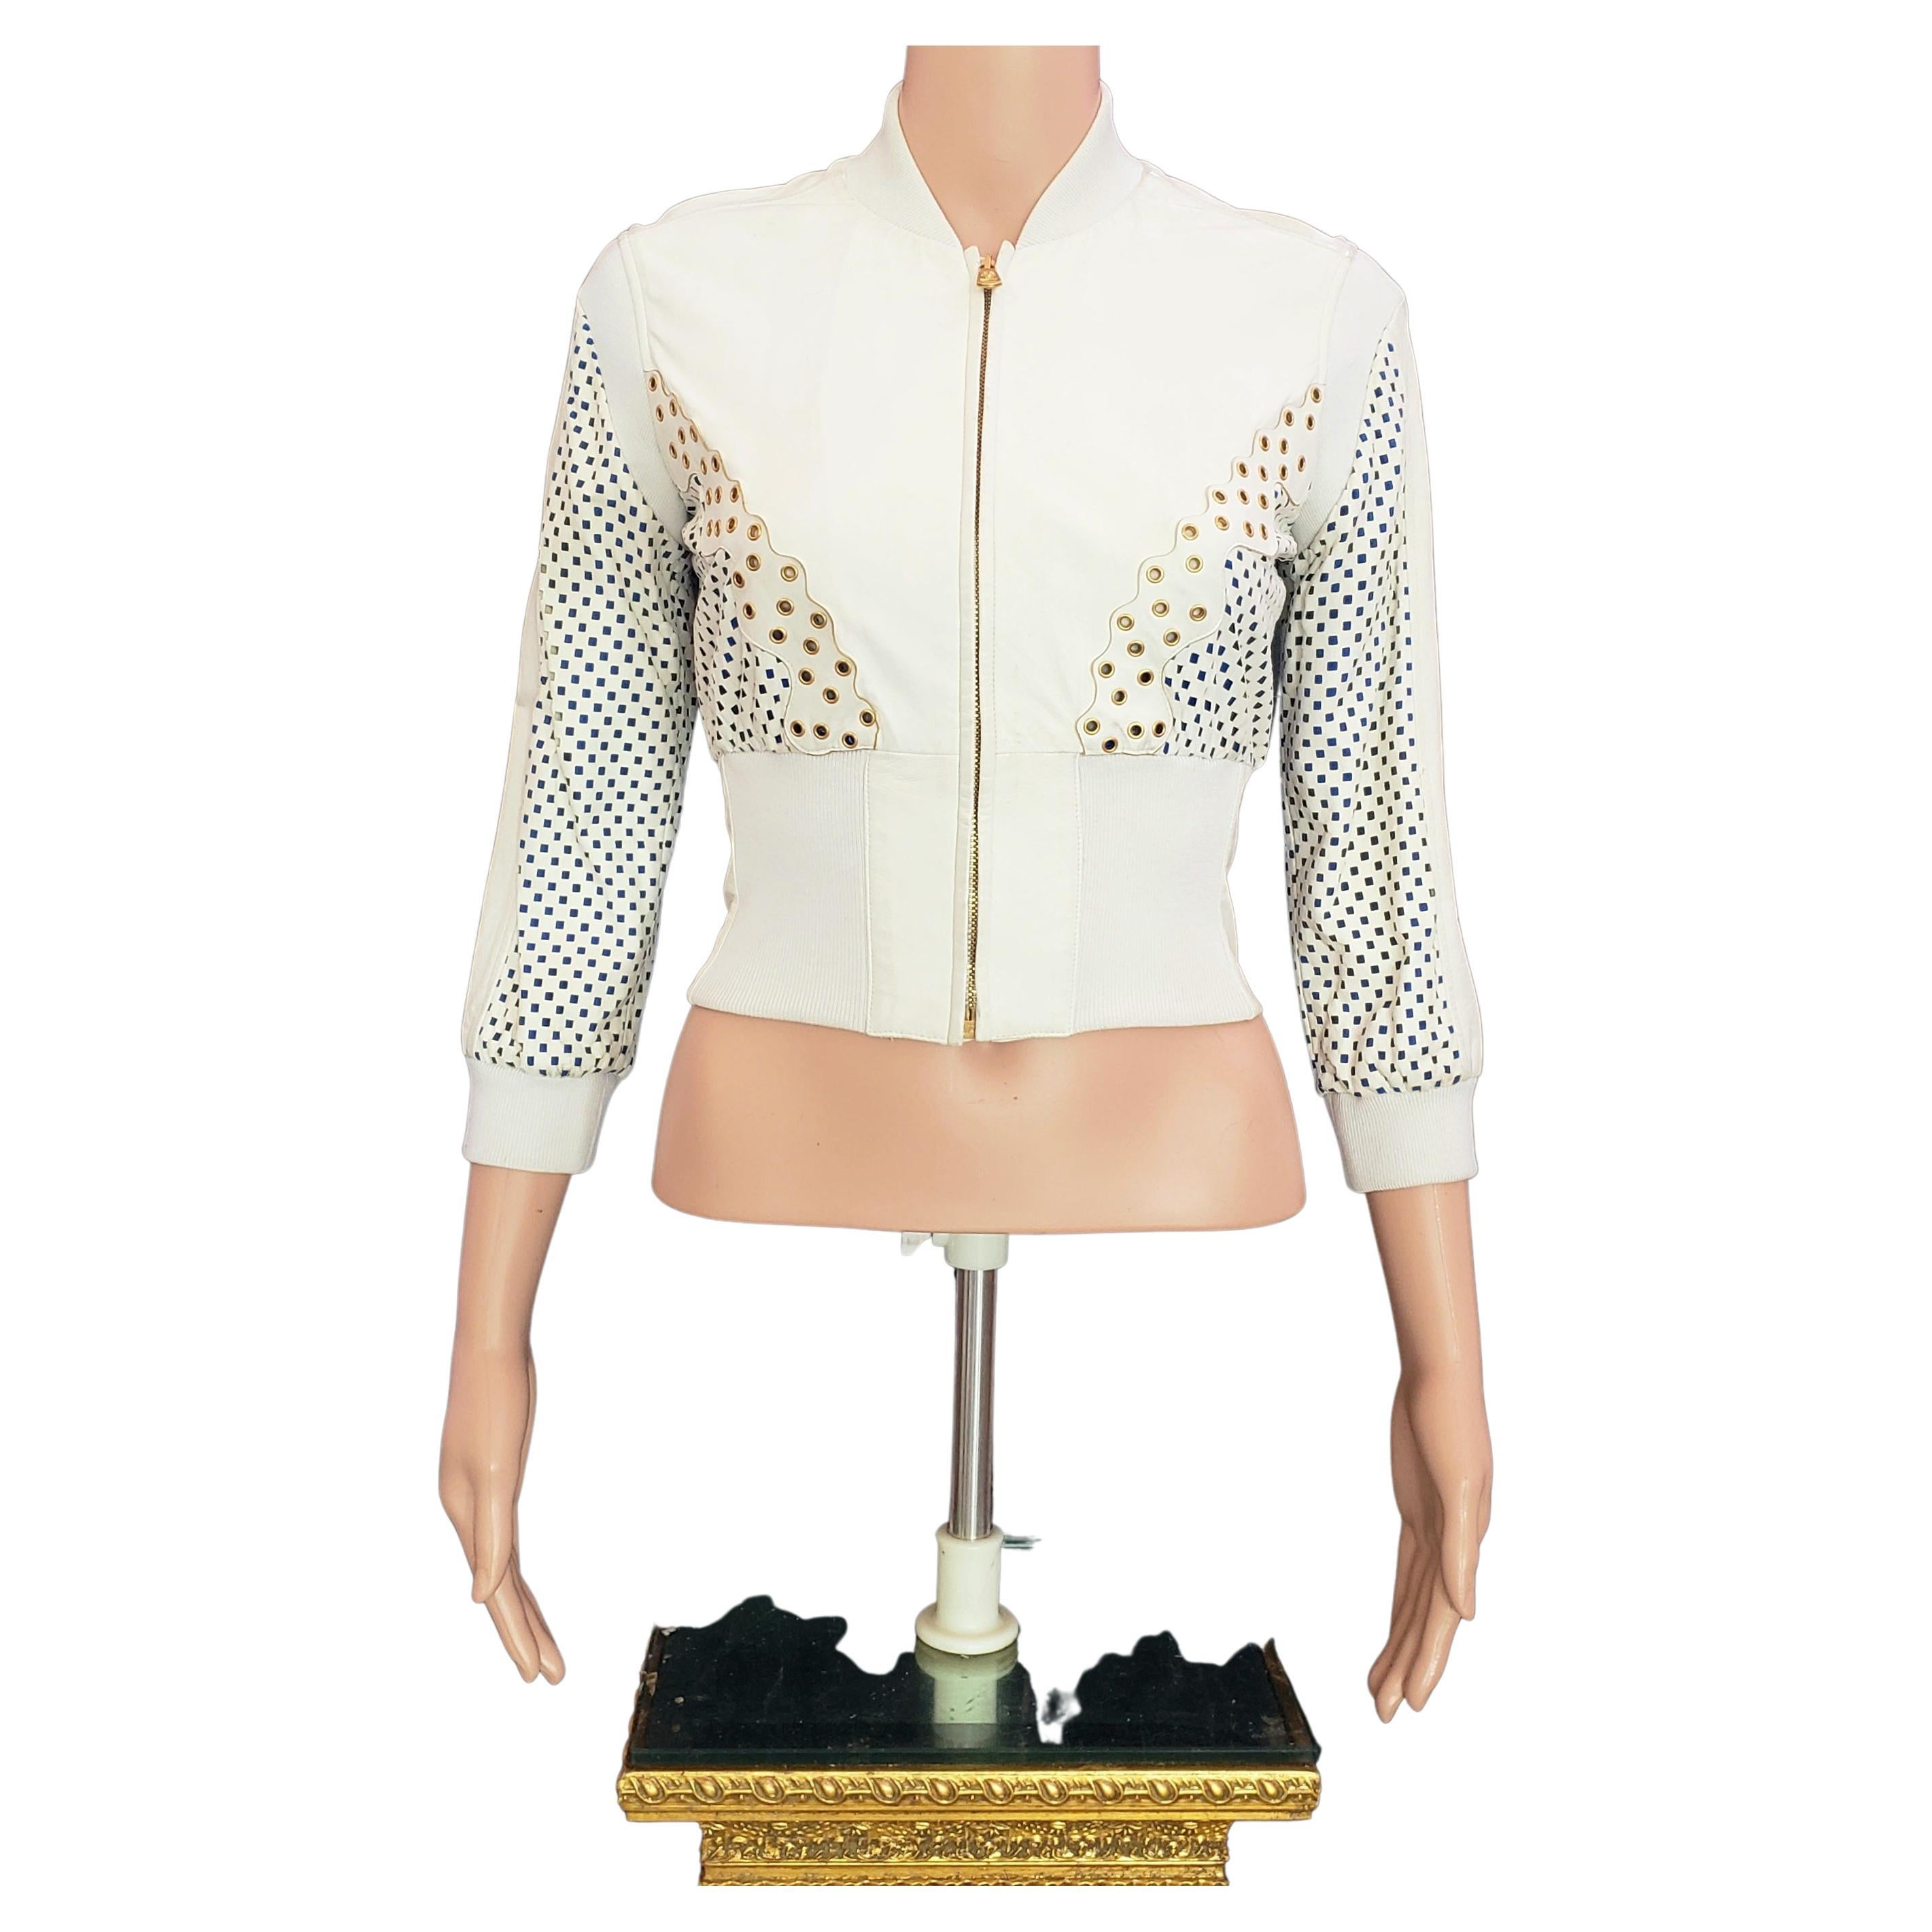 NEW VERSACE RESORT 2012 LOOK#16 CROPPED LEATHER WHITE ZIPPER JACKET Sz 38 - 2 For Sale